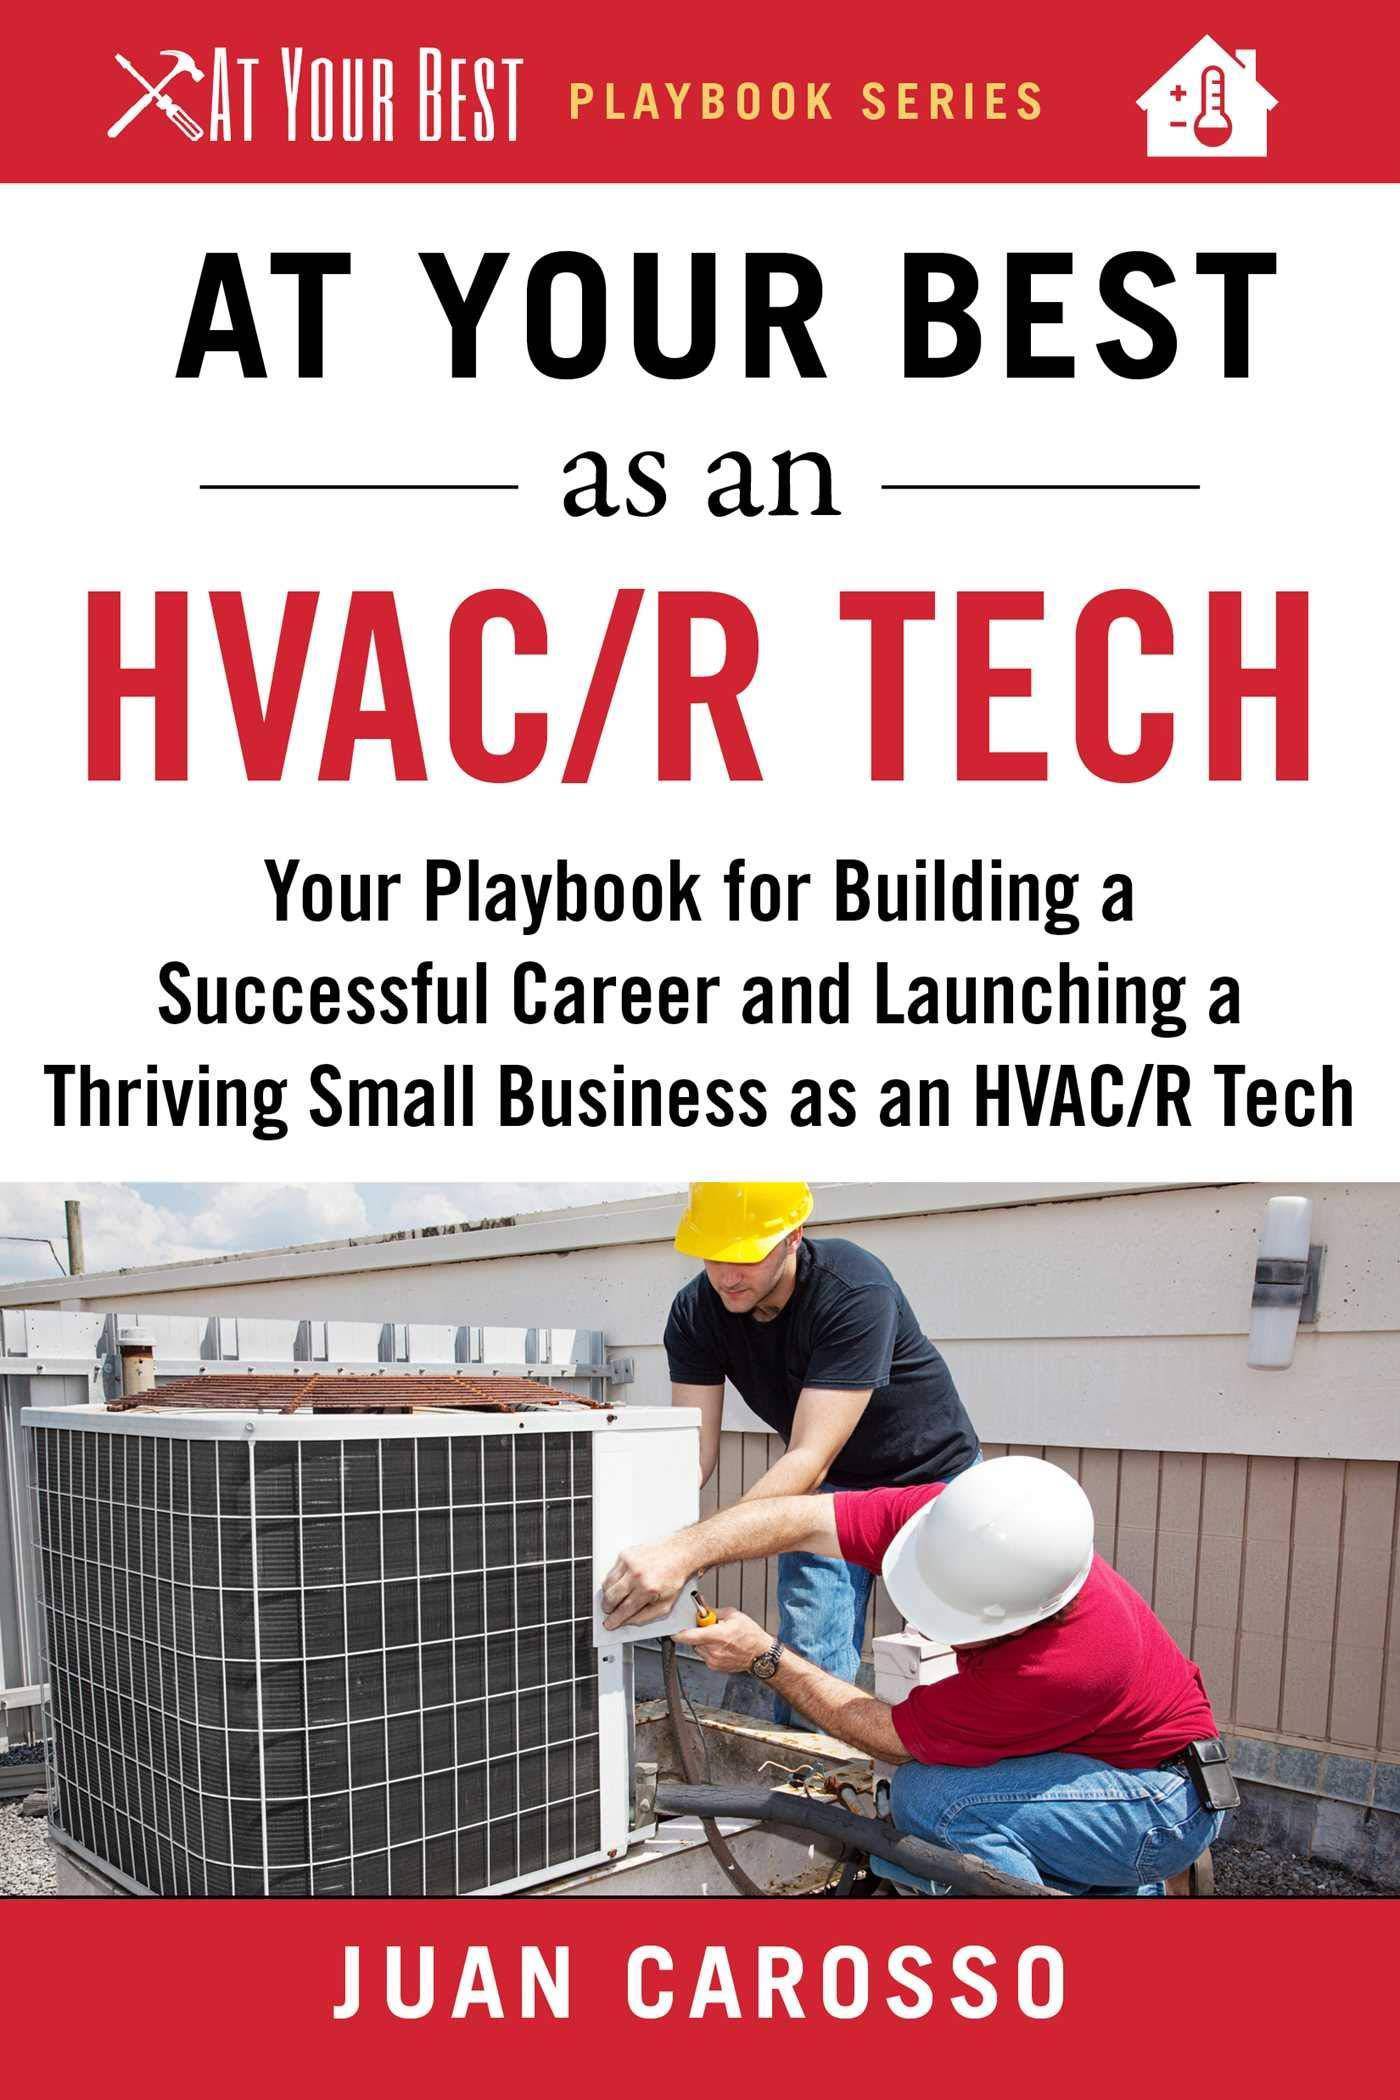 At Your Best as an HVAC-R Tech: Your Playbook for Building a Suc - SureShot Books Publishing LLC